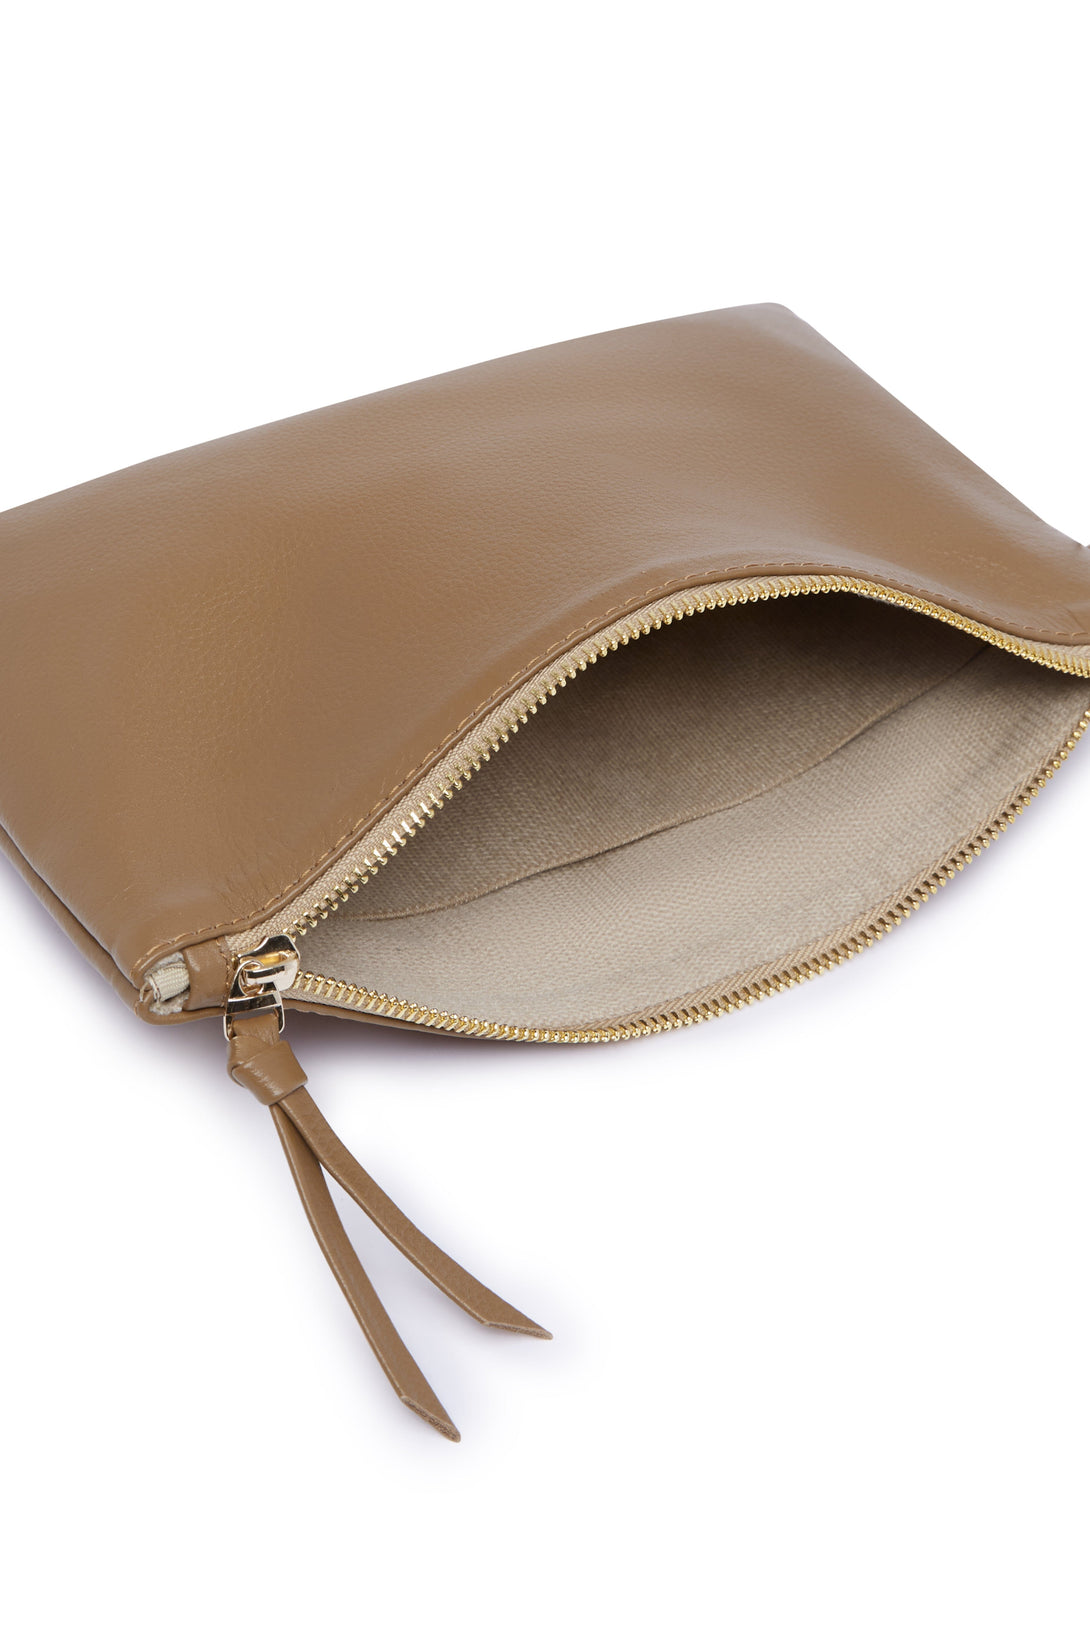 Cassie Clutch Tan Soft Leather - Pre Order Leather